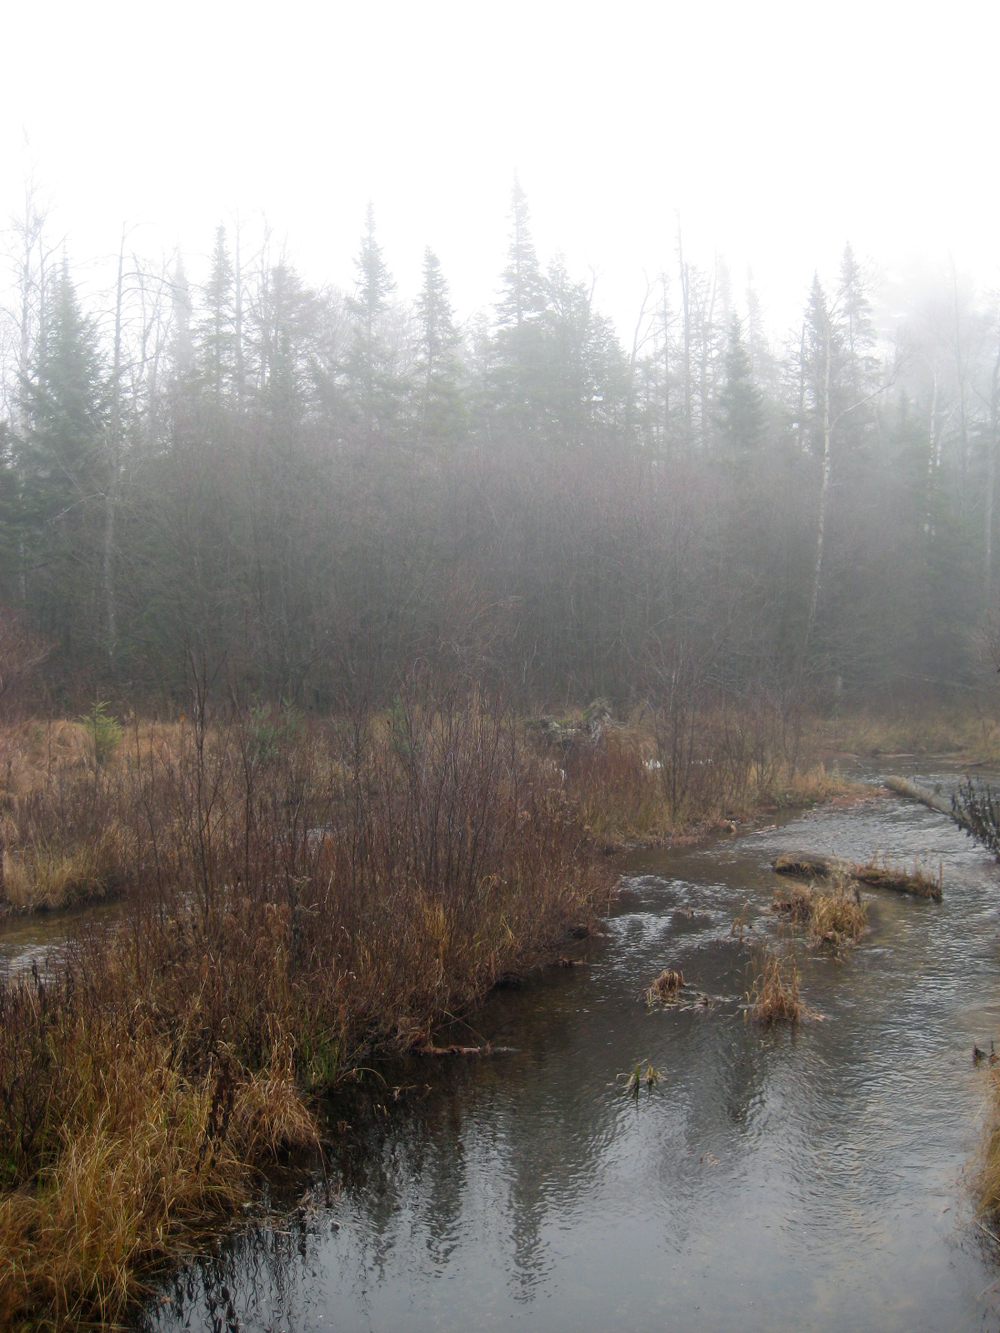 Pendill's Creek in Michigan, a tributary to Lake Superior, receives annual runs of introduced Pacific salmon. (Credit: Peter Levi)